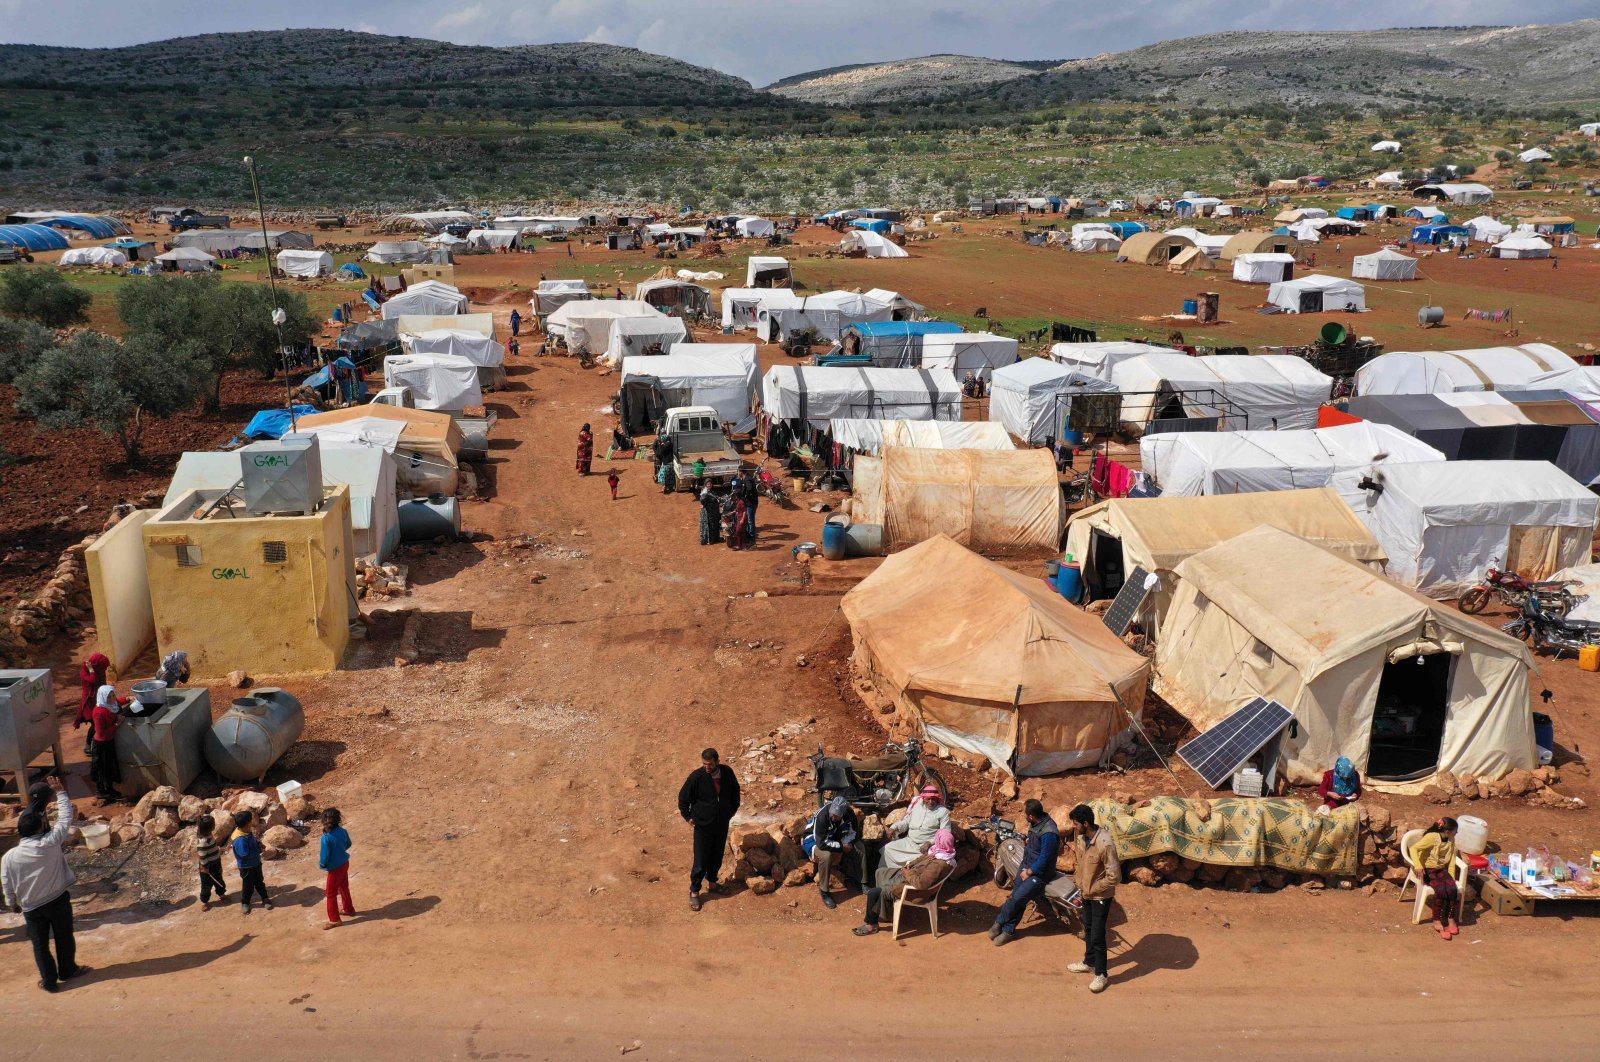 A displaced camp in the town of Kafr Uruq southwest of the town of Sarmada in Syria's northwestern Idlib province, March 17, 2020. (AFP Photo)